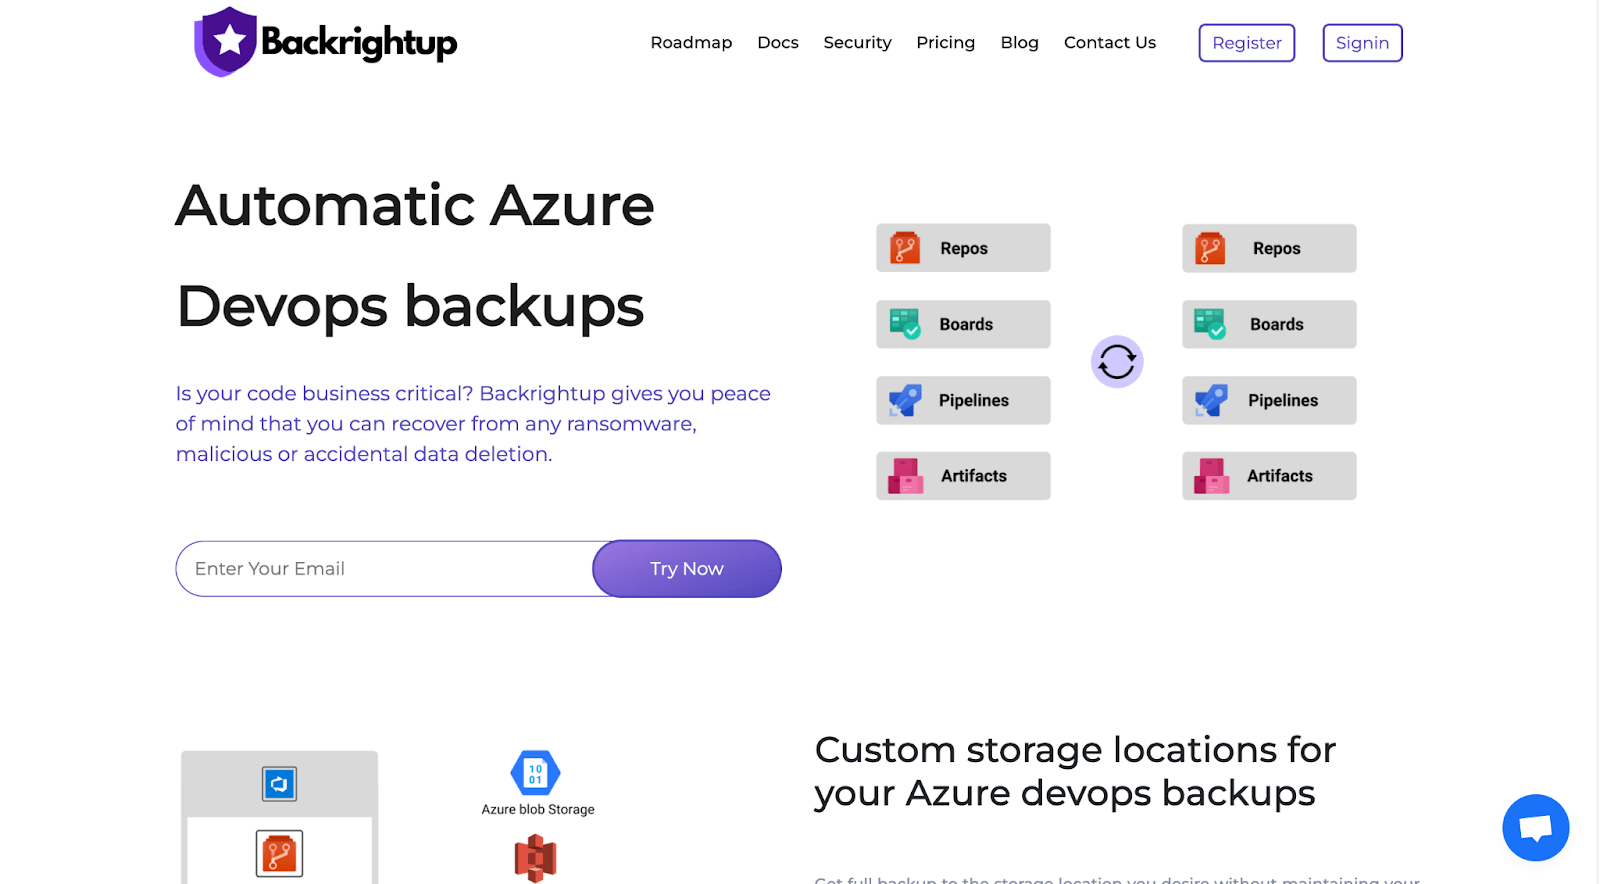 Backrightup home page